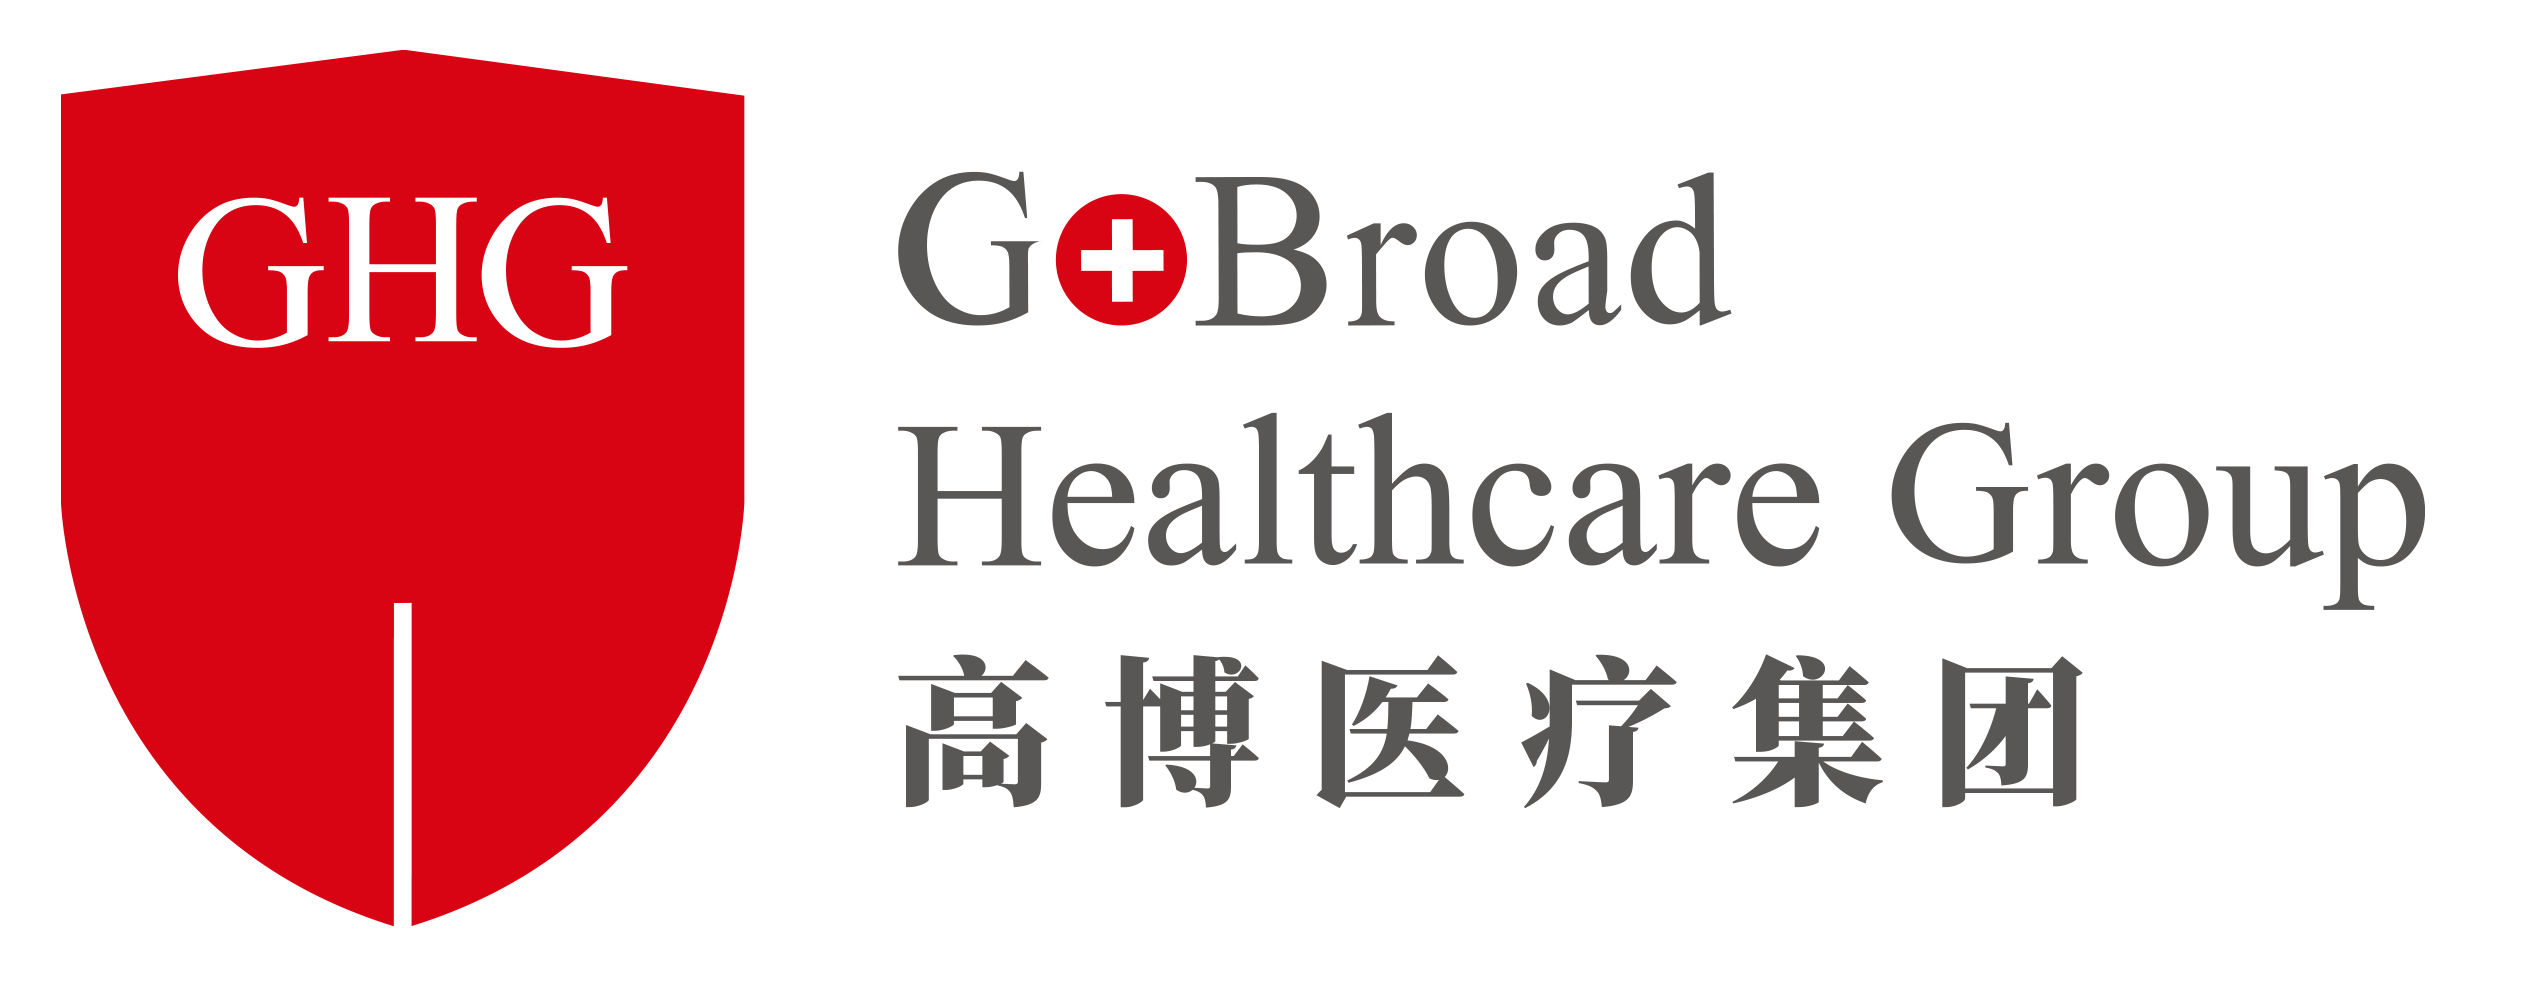 Gobroad HealthCare Group